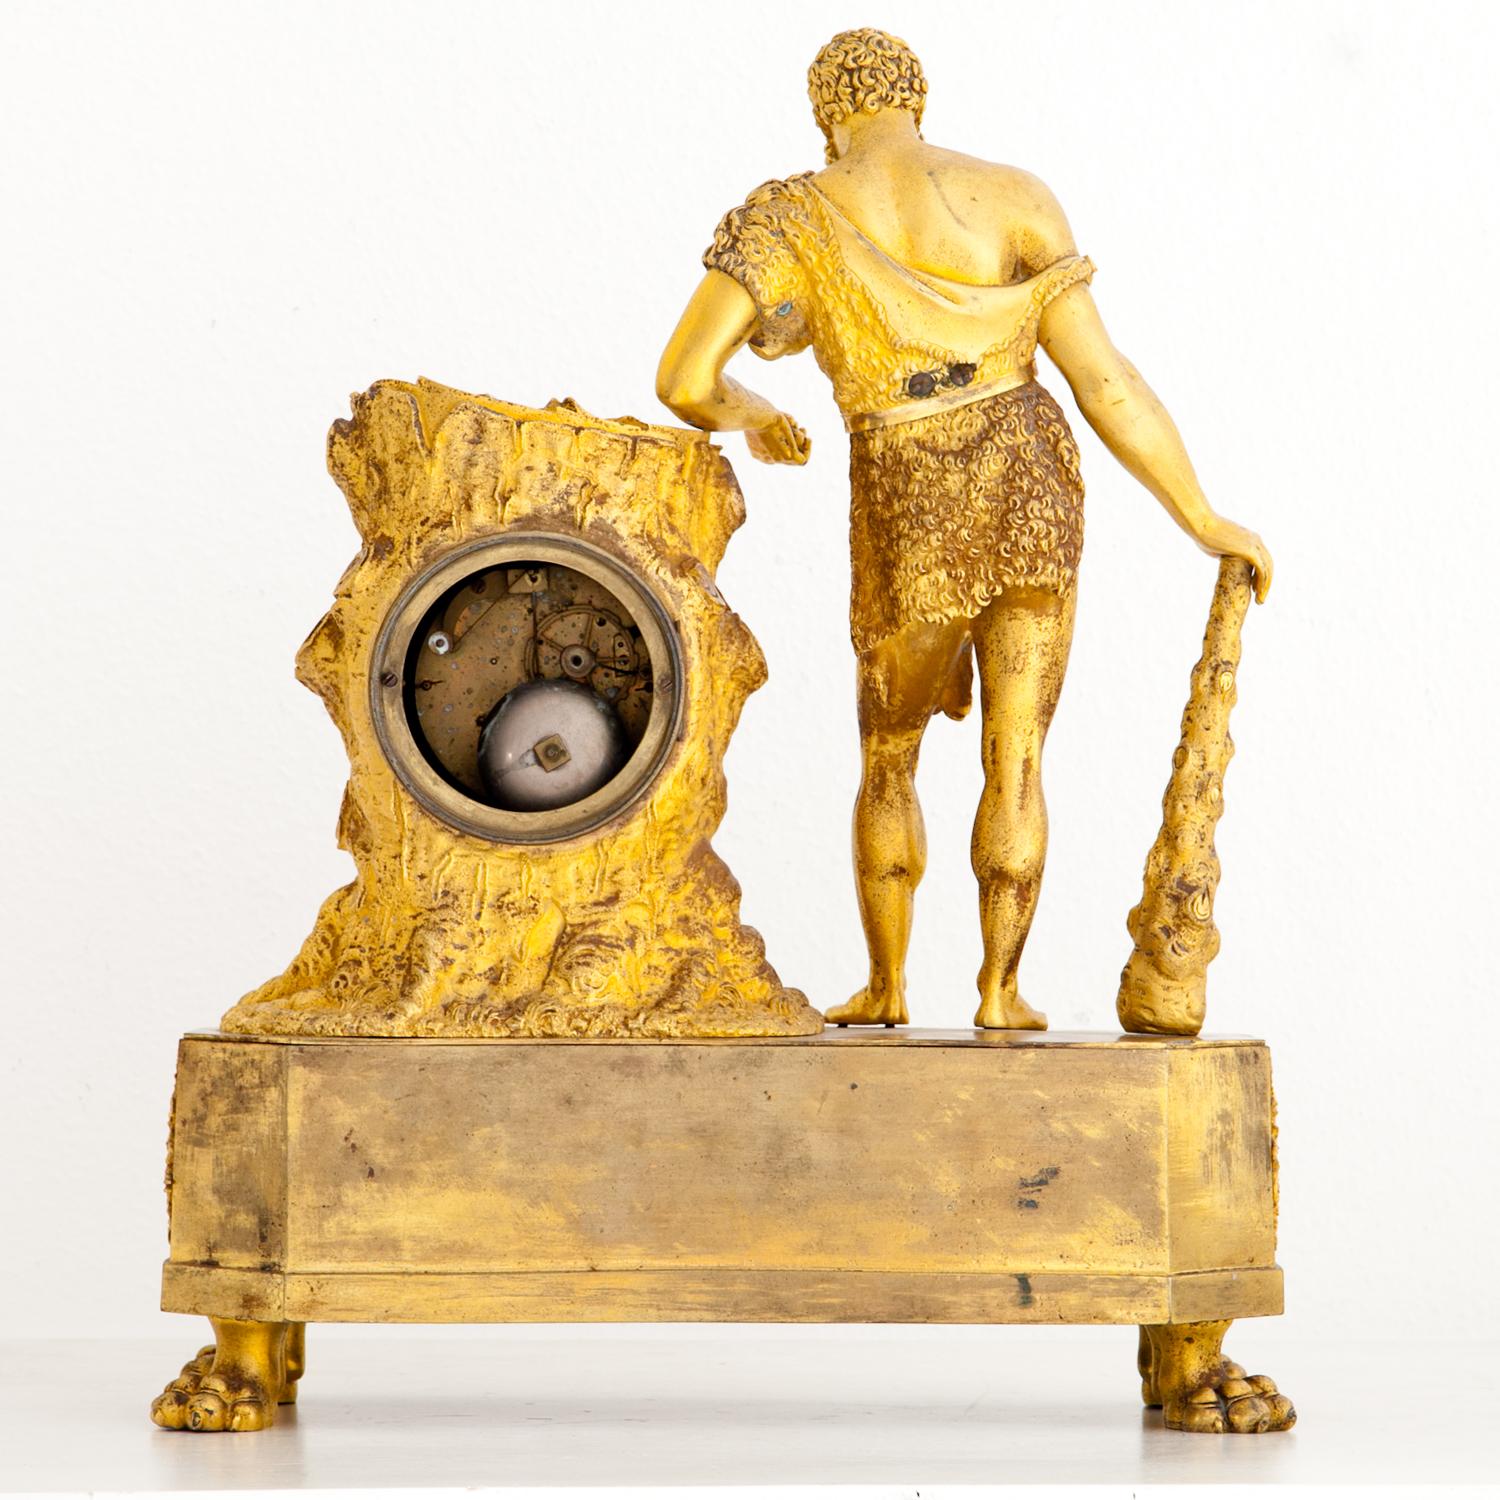 Large Empire pendula clock with depiction of Hercules, leaning on a tree trunk, housing the clockwork. The enamel clock face is signed “Rodin à Paris”. The octagonal base with lion’s paw feet shows Hercules’ attributes as well as caduceus-ornaments